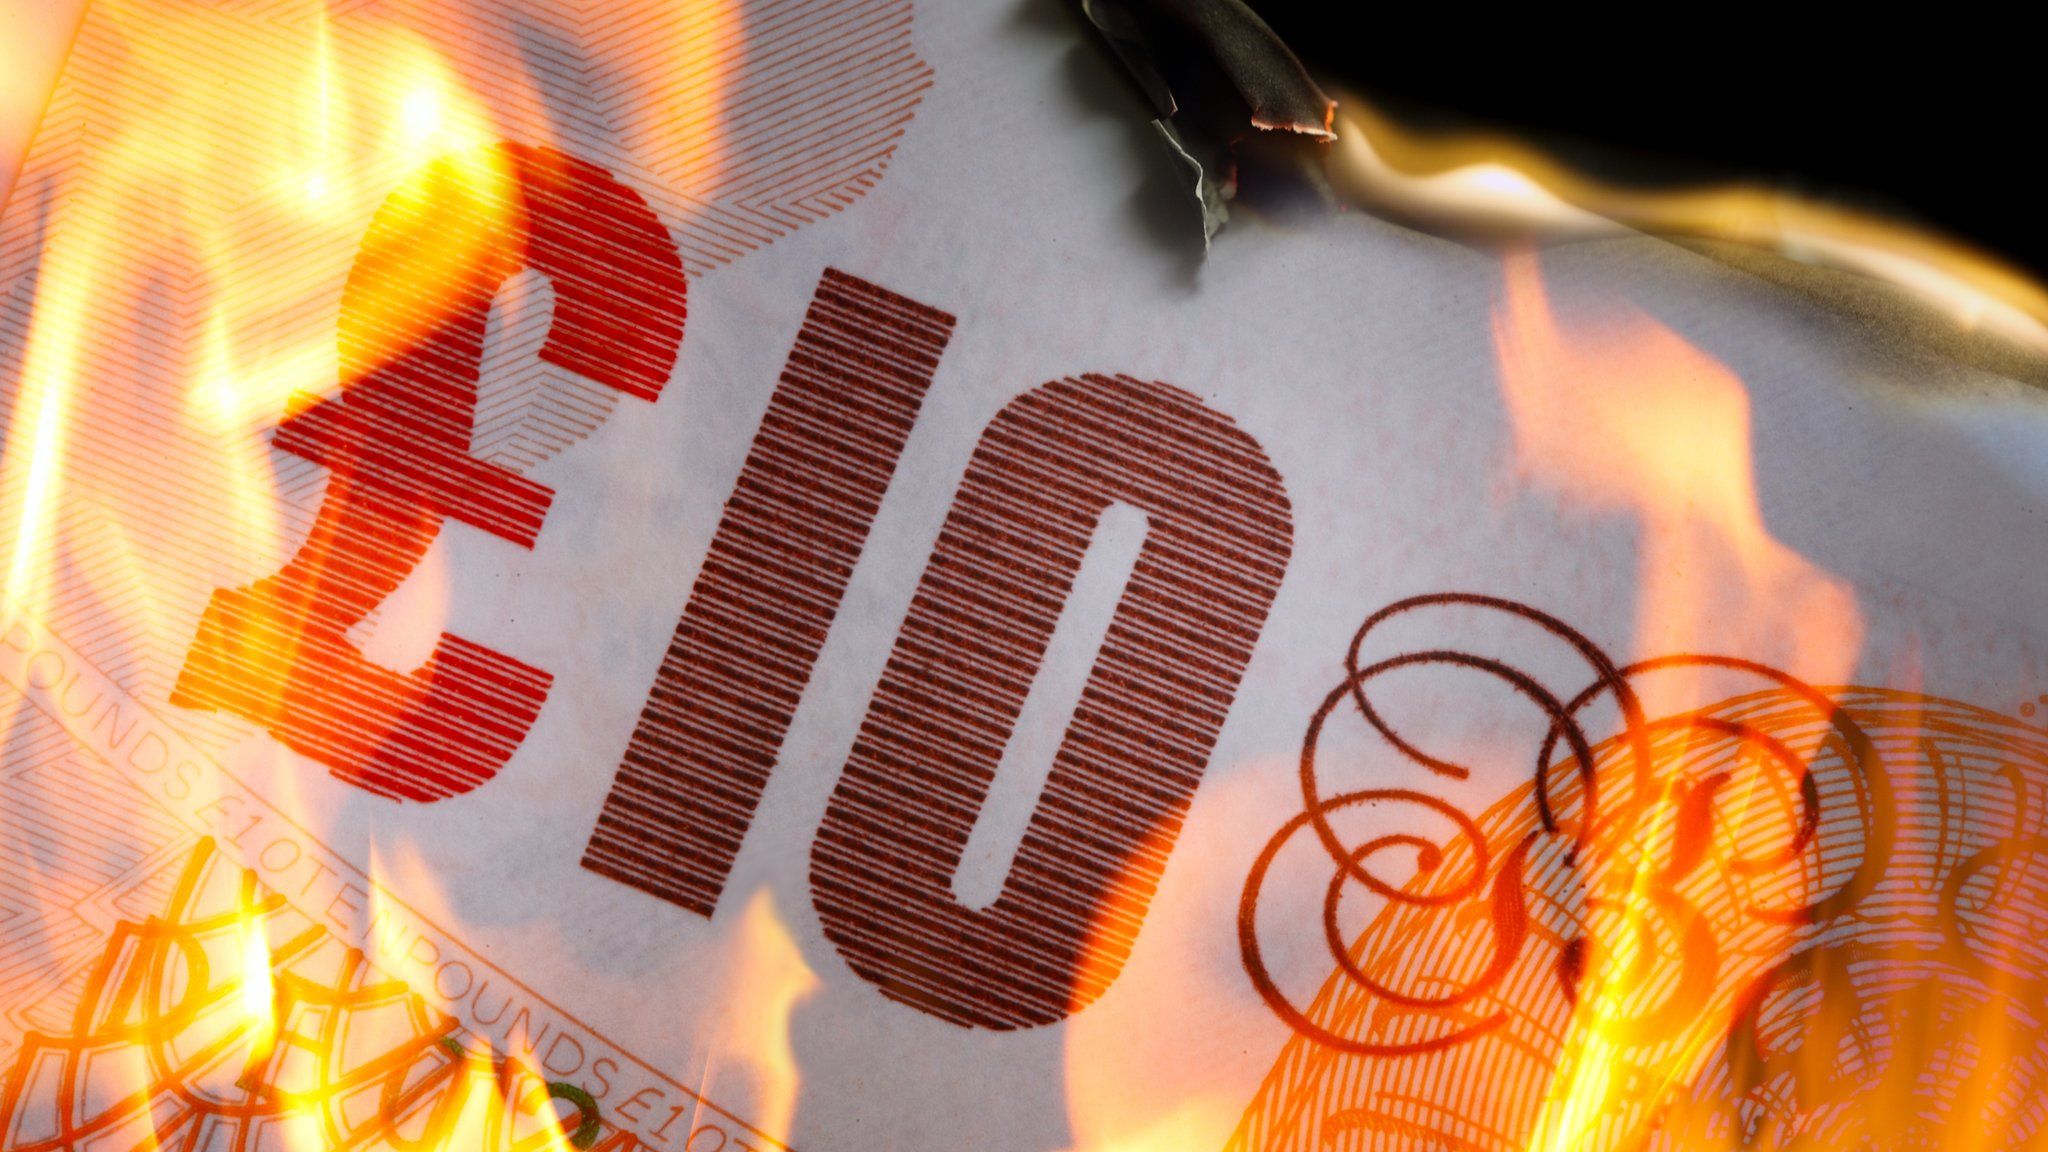 £10 note on fire